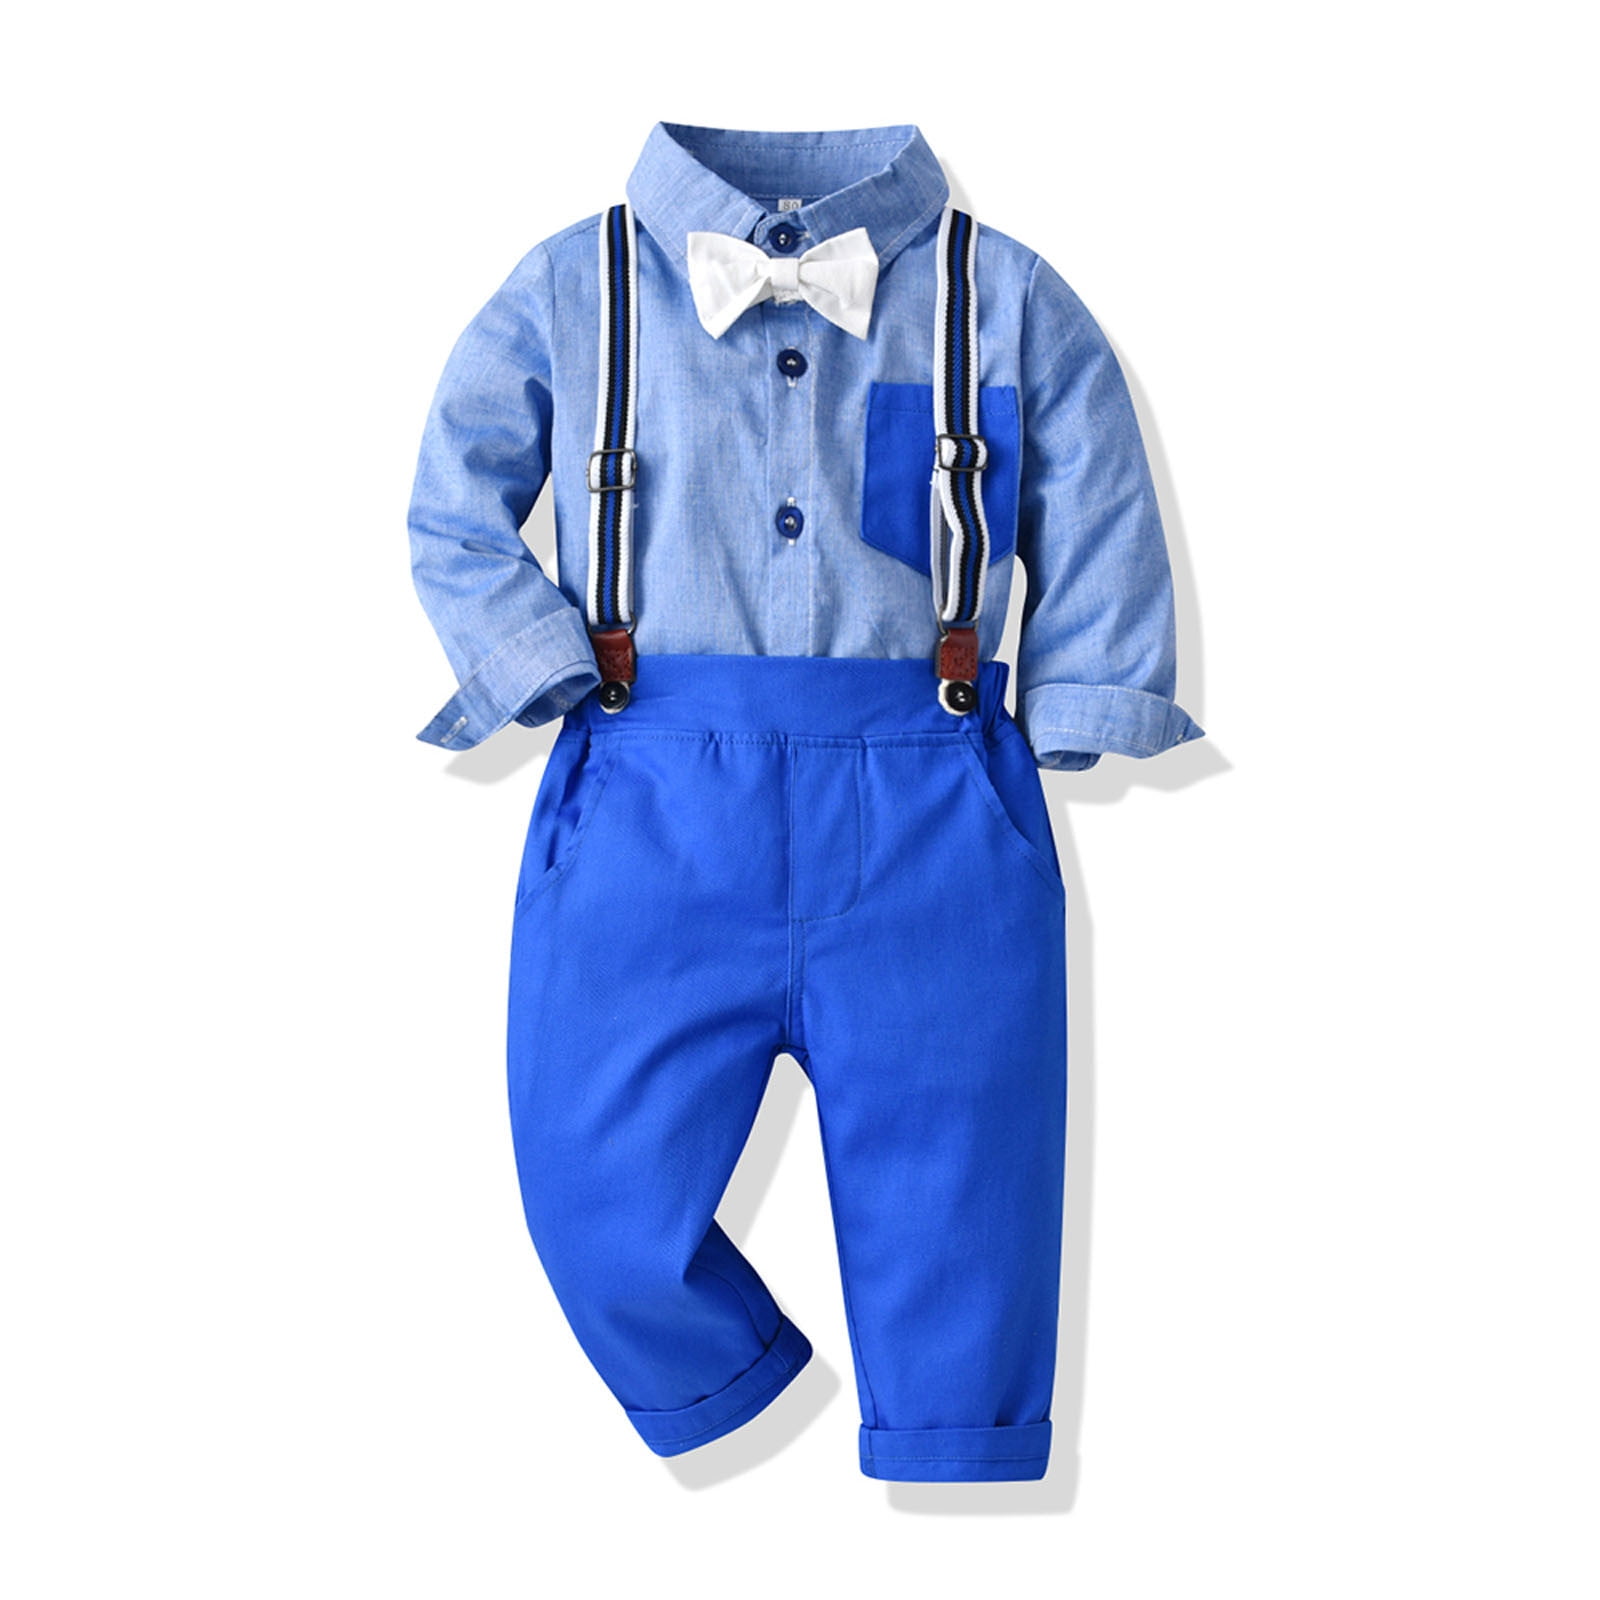 ZFTTZYMX Baby Boys 3Pcs Gentleman Suit Kids Formal Outfits India | Ubuy